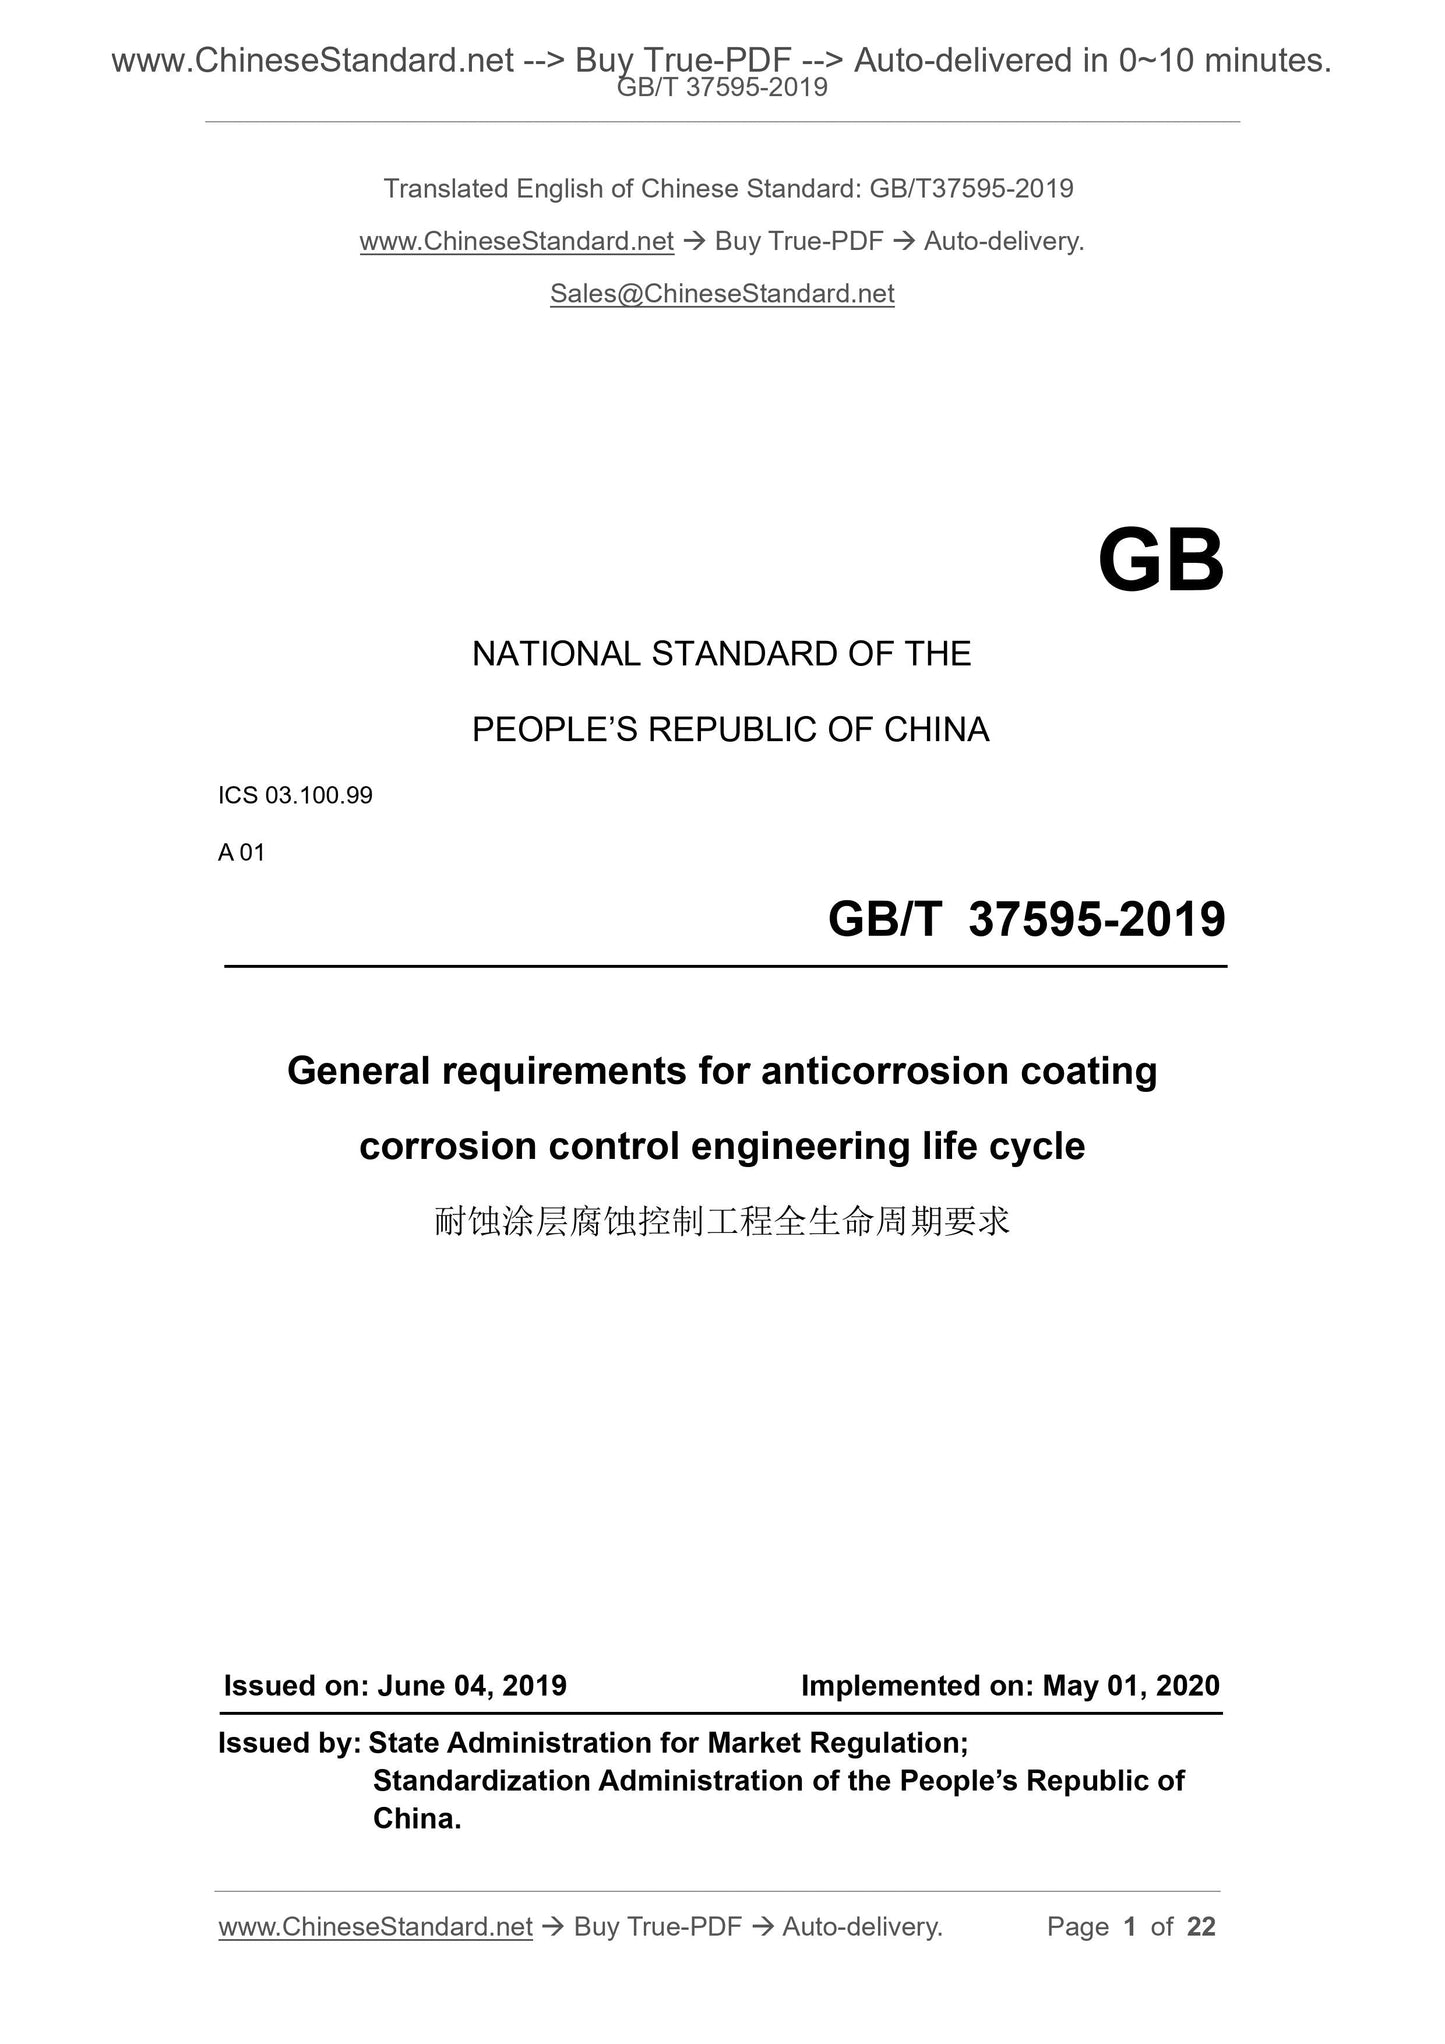 GB/T 37595-2019 Page 1